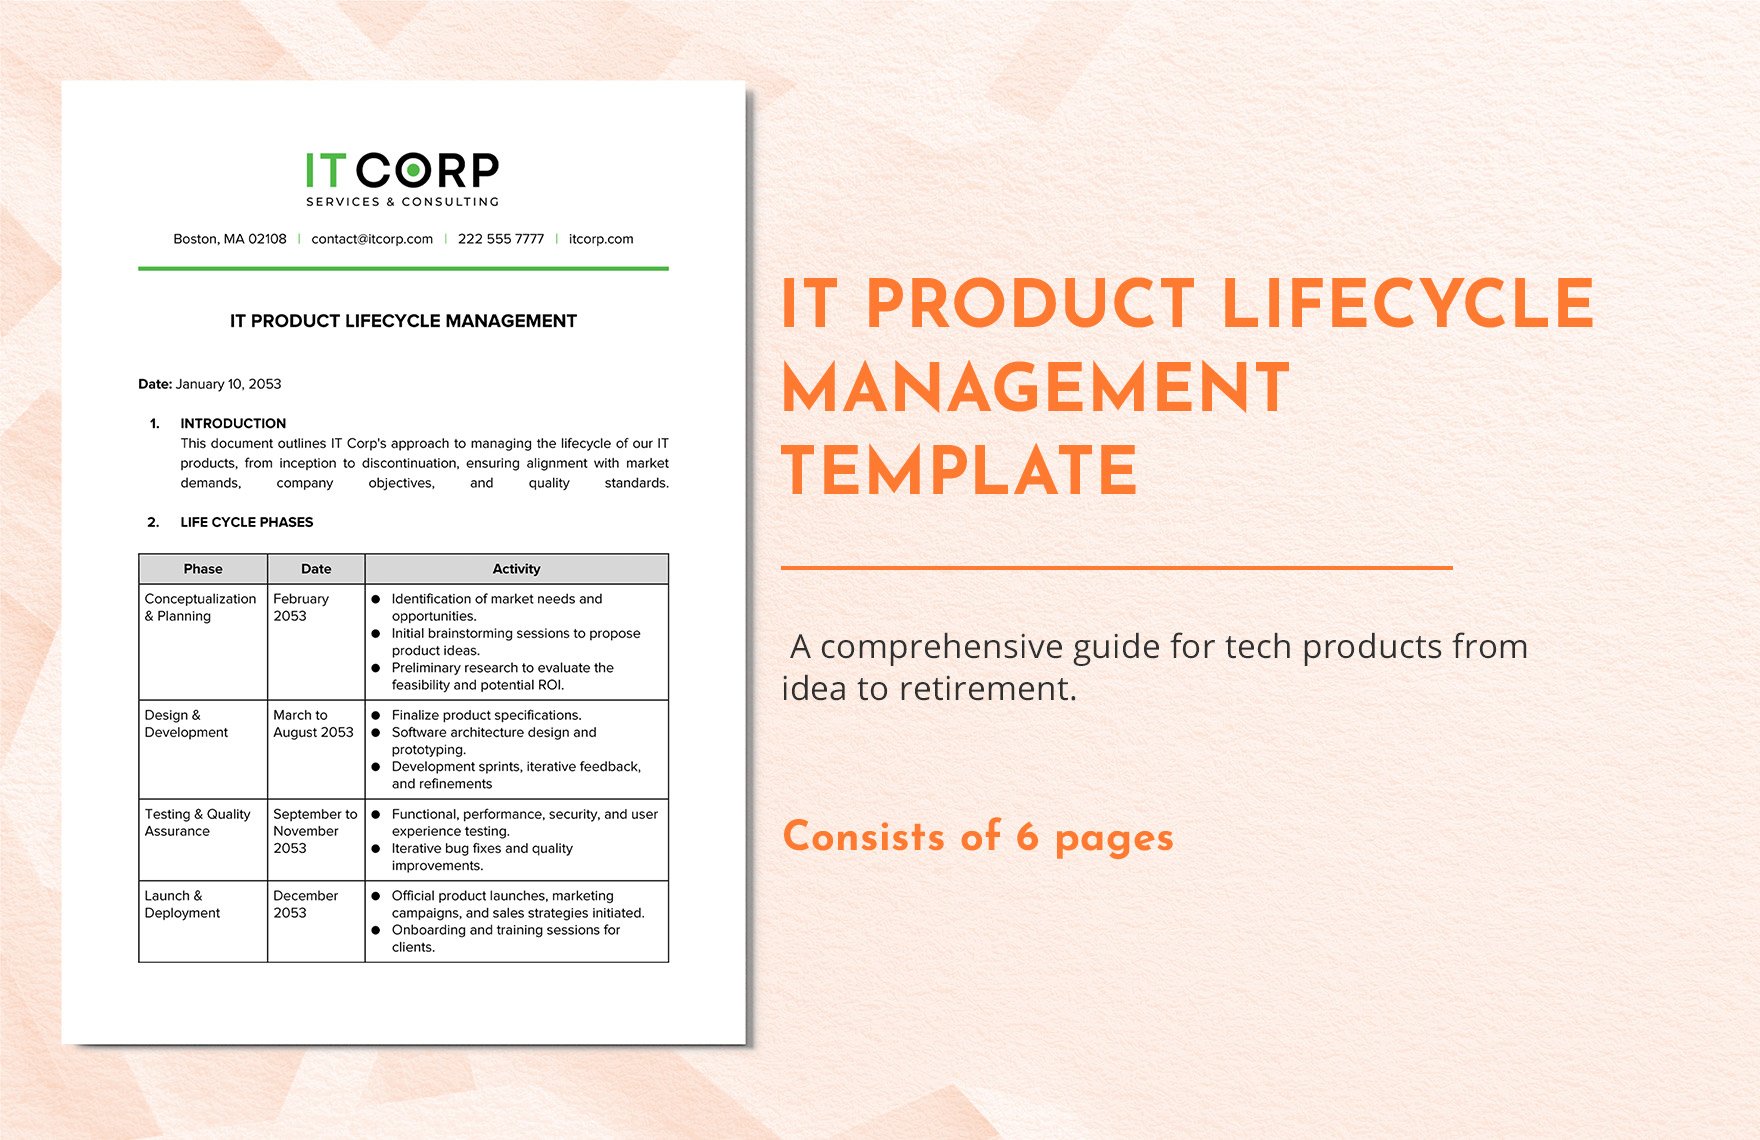 IT Product Lifecycle Management Template